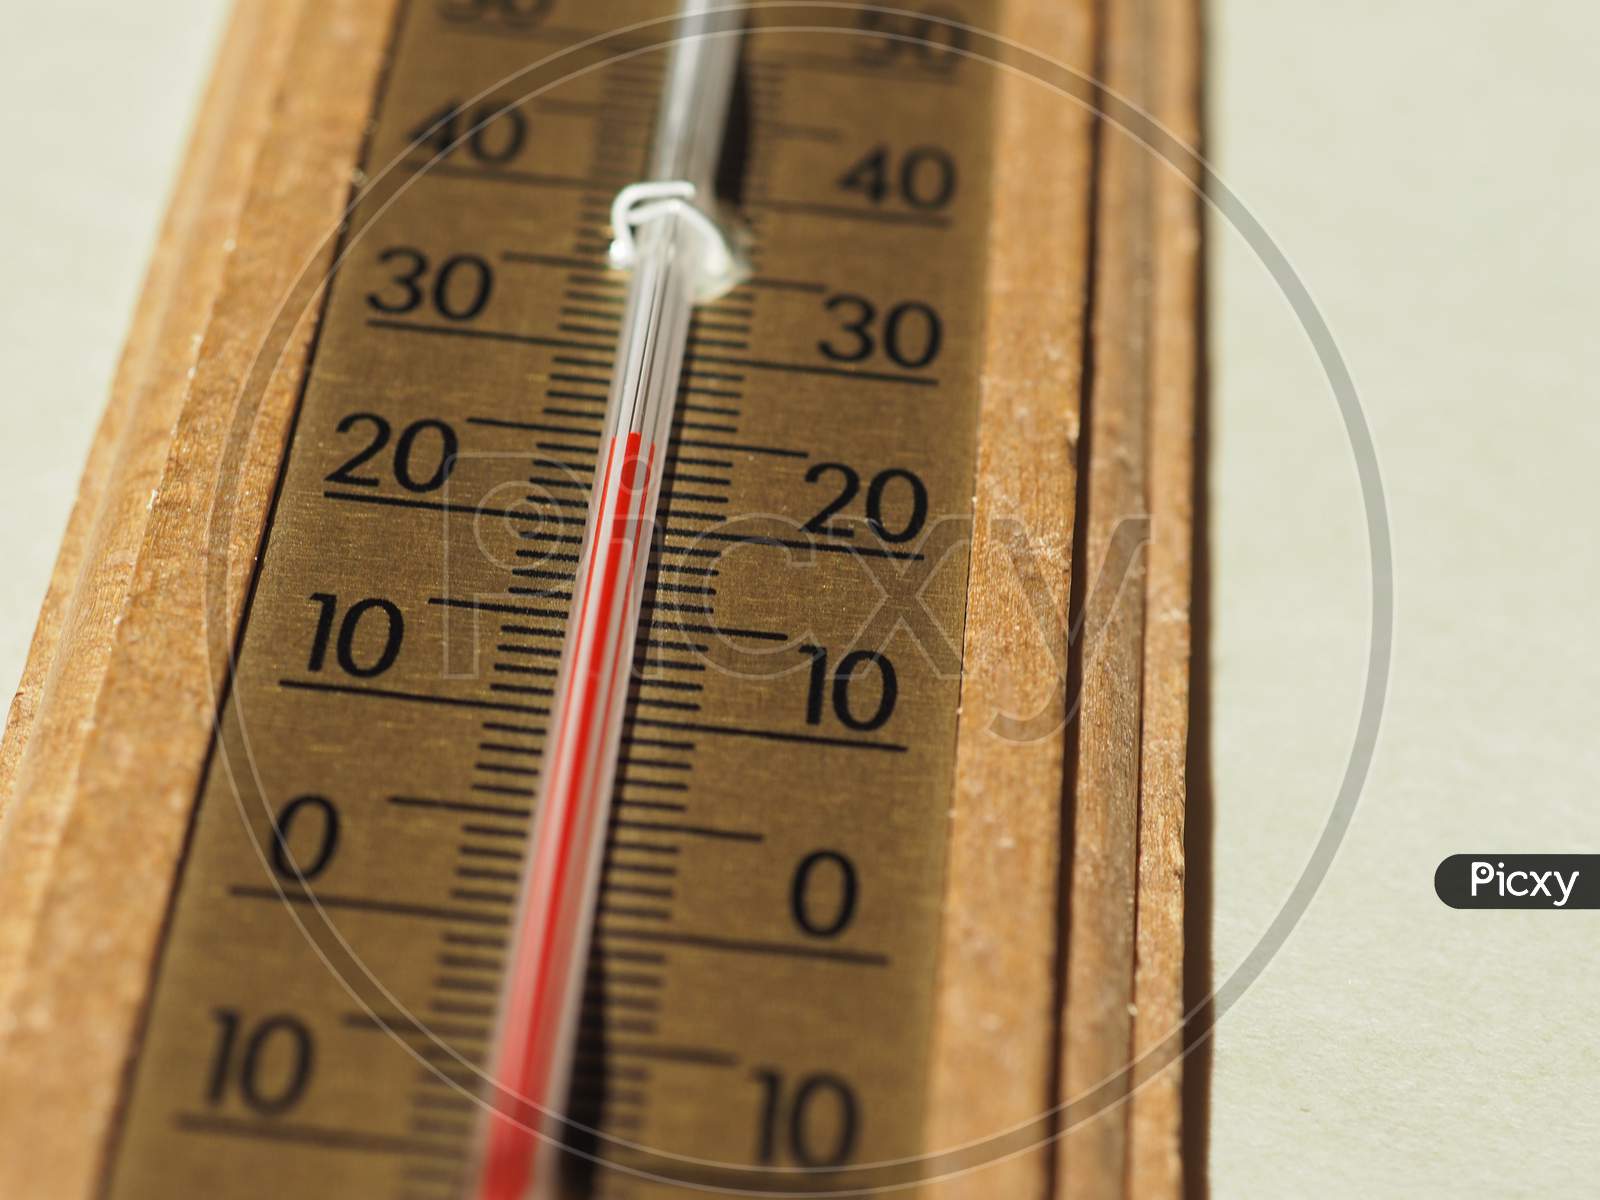 How Does a Thermometer Measure Air Temperature?